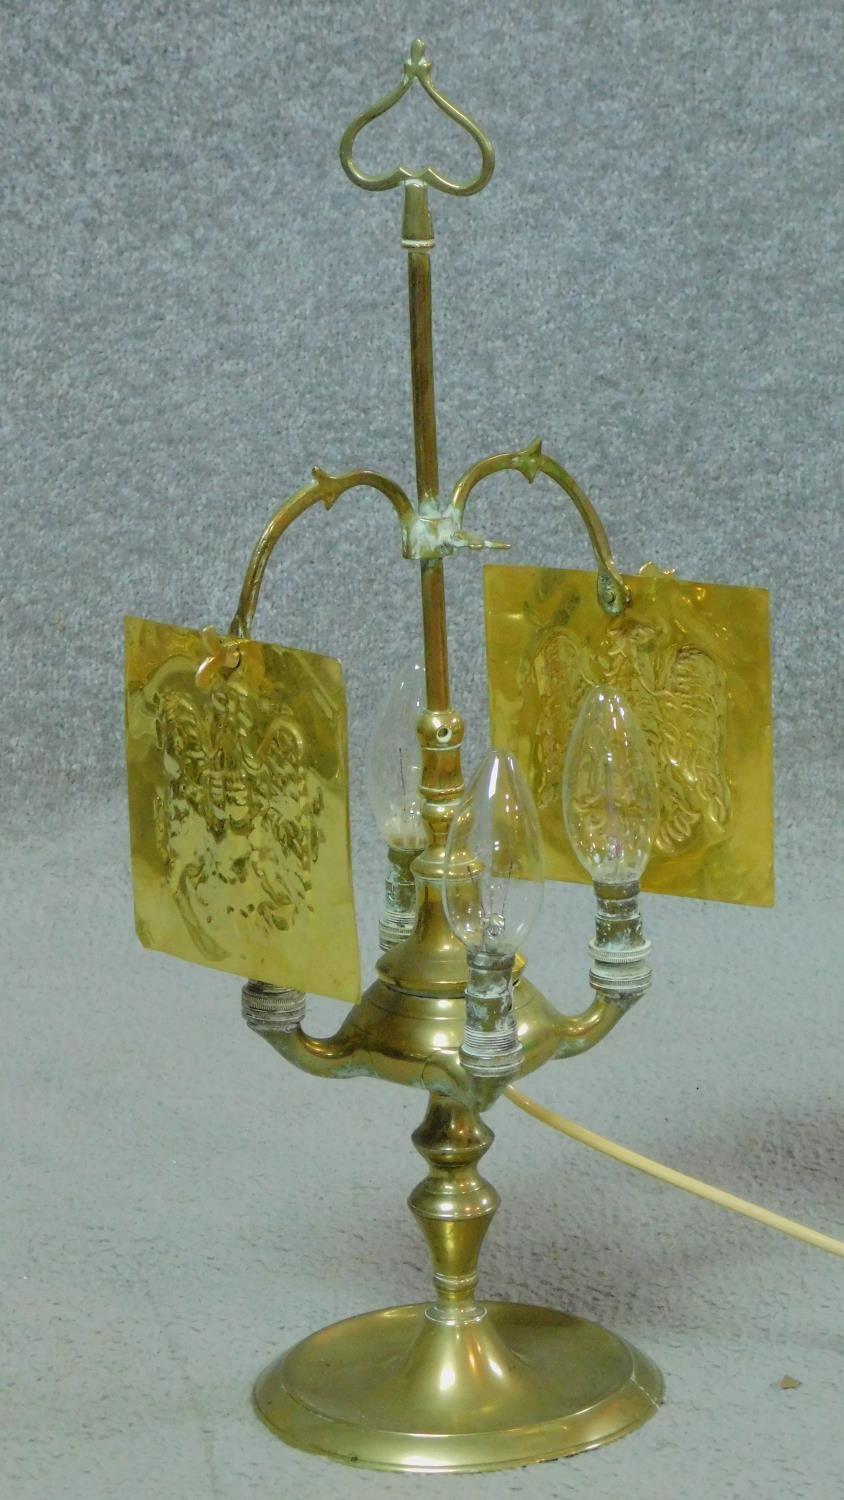 A 19th Century Italian brass lucerna, converted to electric, adjustable, four branch oil lamp. It